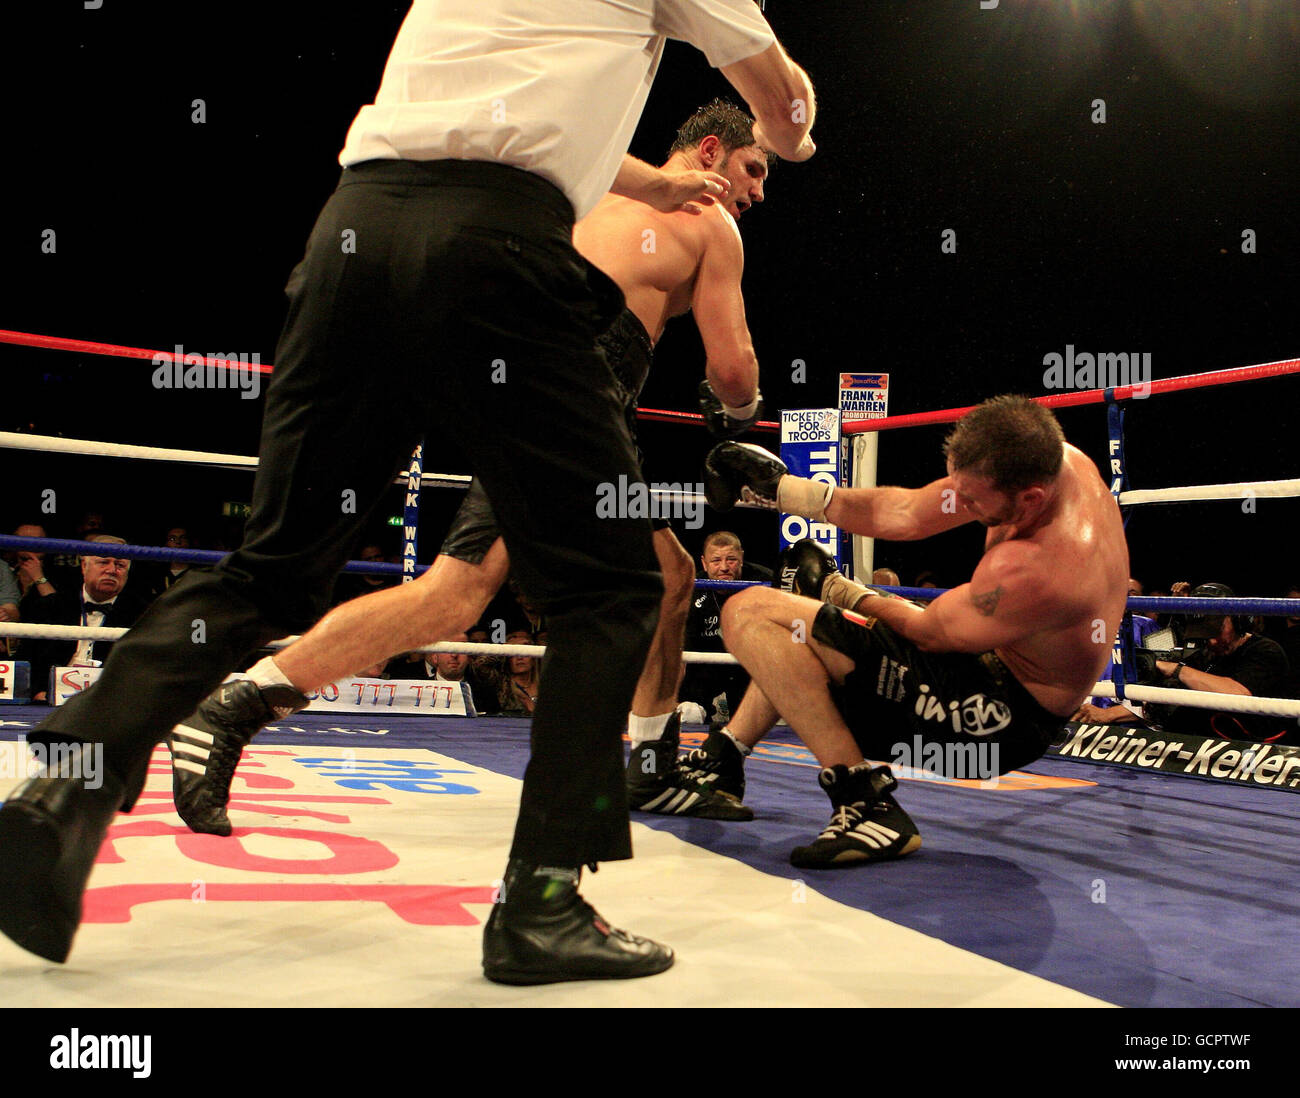 United Kingdom's Enzo Maccarinelli (right) is knocked out in round seven by Germany's Alexander Frenkel during the European Cruiserweight Championship fight at the LG Arena, Birmingham. Stock Photo